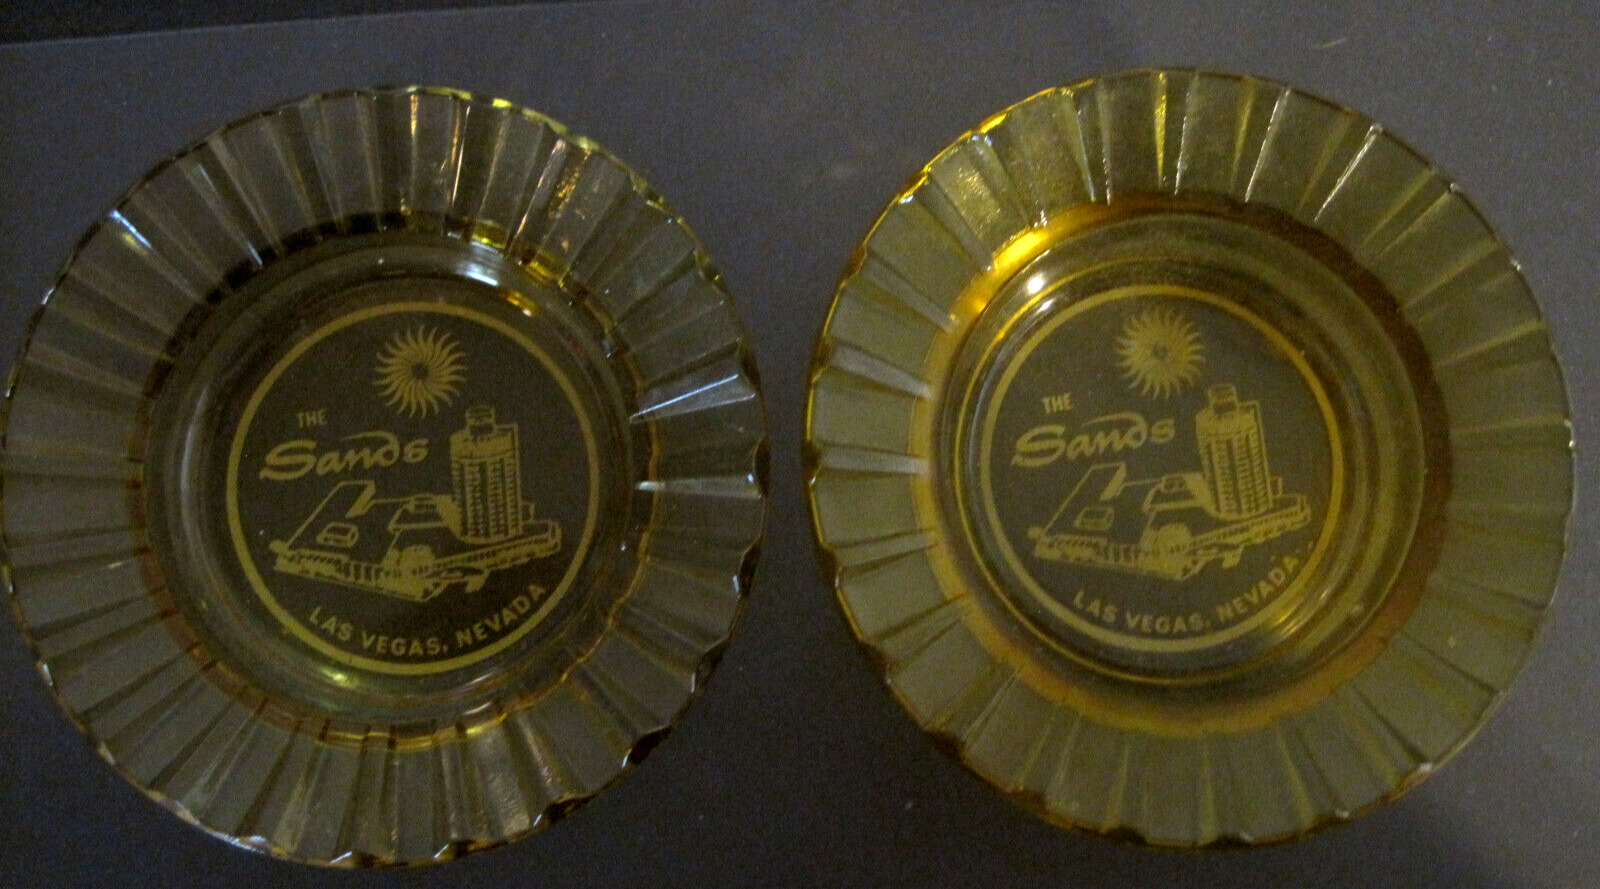 2 VINTAGE AMBER COLORED ASHTRAYS FOR THE SANDS HOTEL AND CASINO  LAS VEGAS